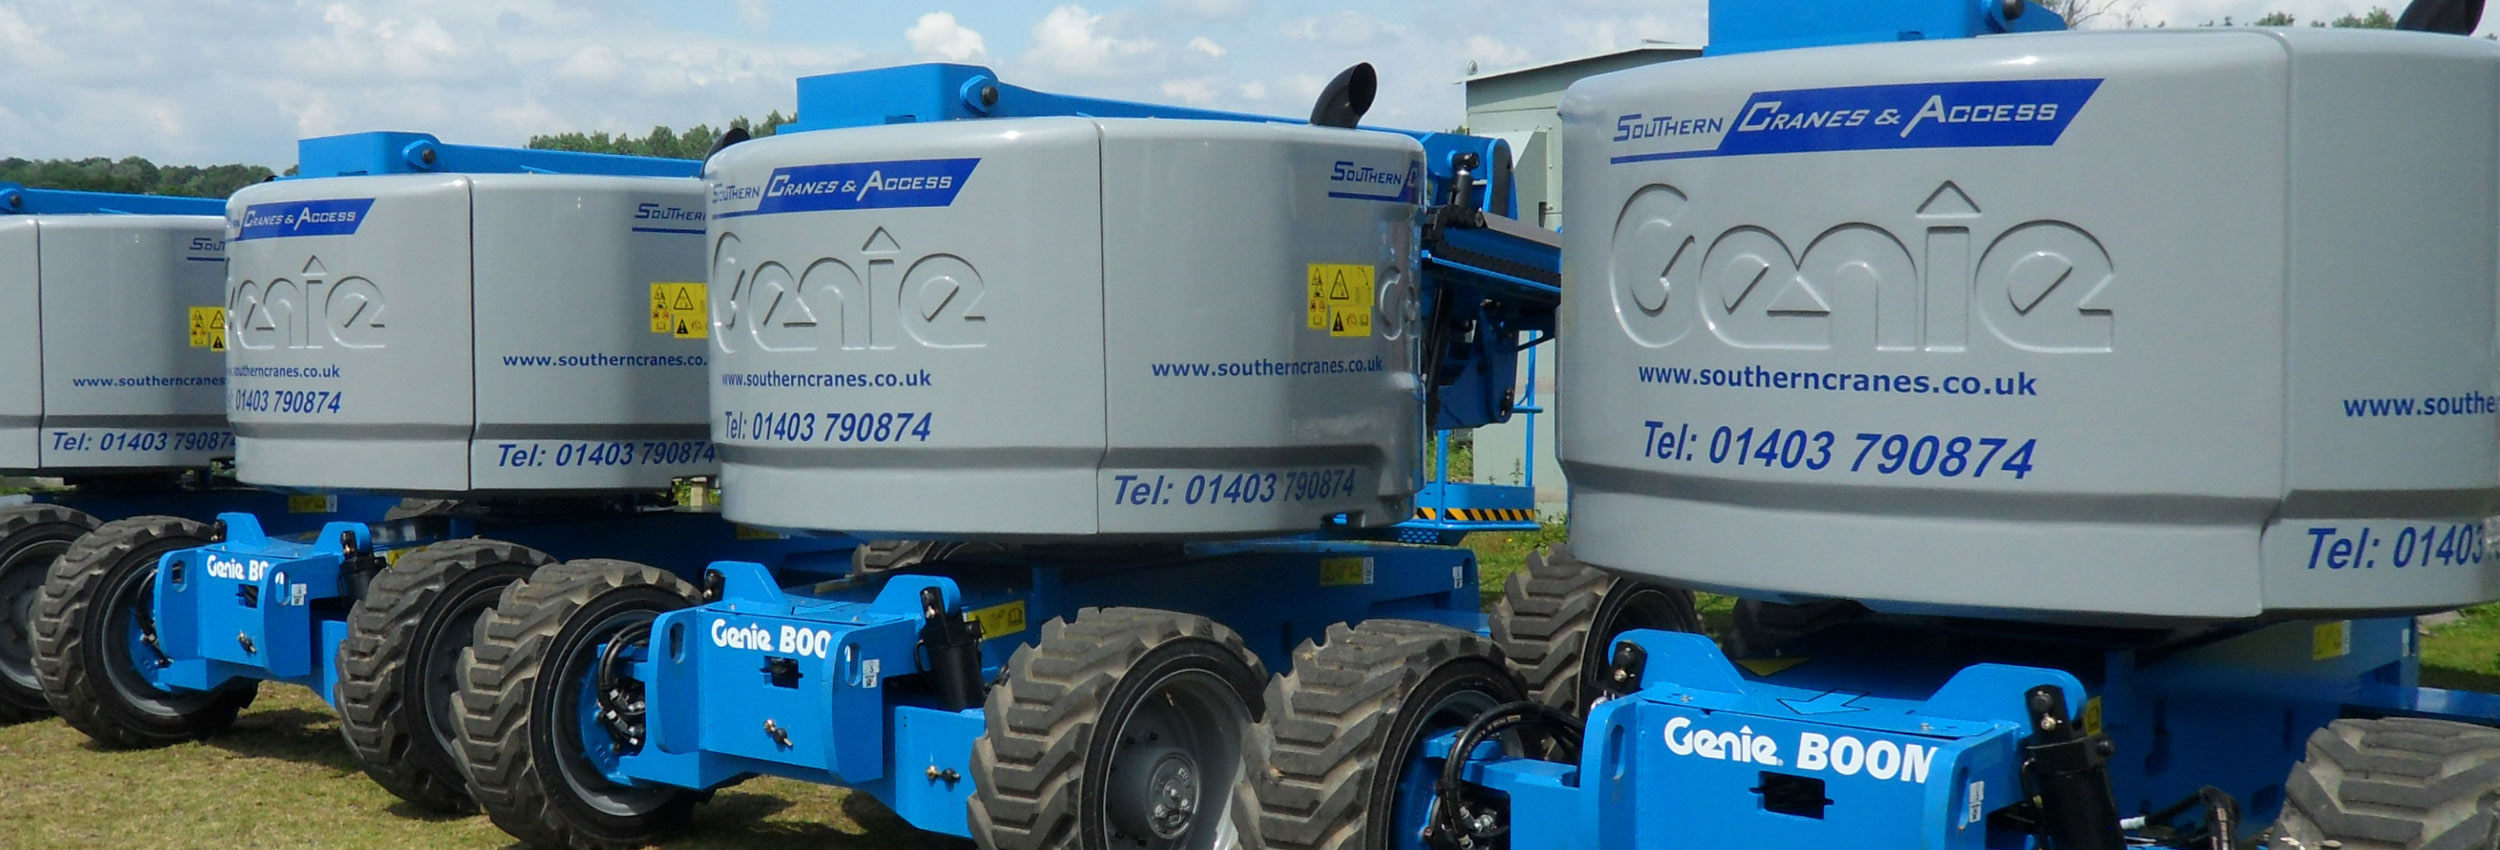 Powered Access, Plant Hire - Southern Cranes & Access, Sussex, Surrey